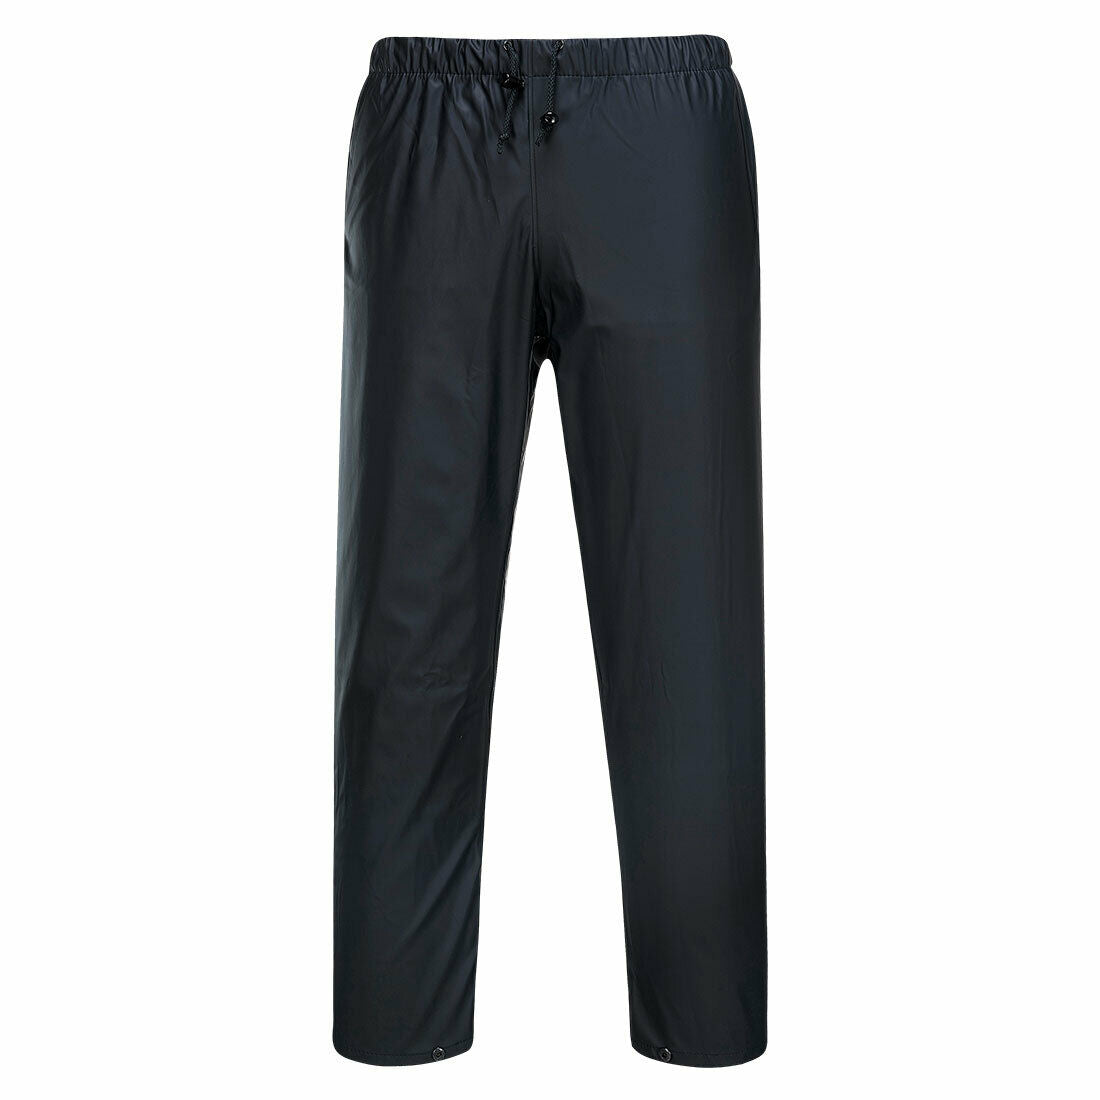 Portwest Mens Huski Farmers Pants Breathable Waterproof Work Safety Comfy K8102-Collins Clothing Co